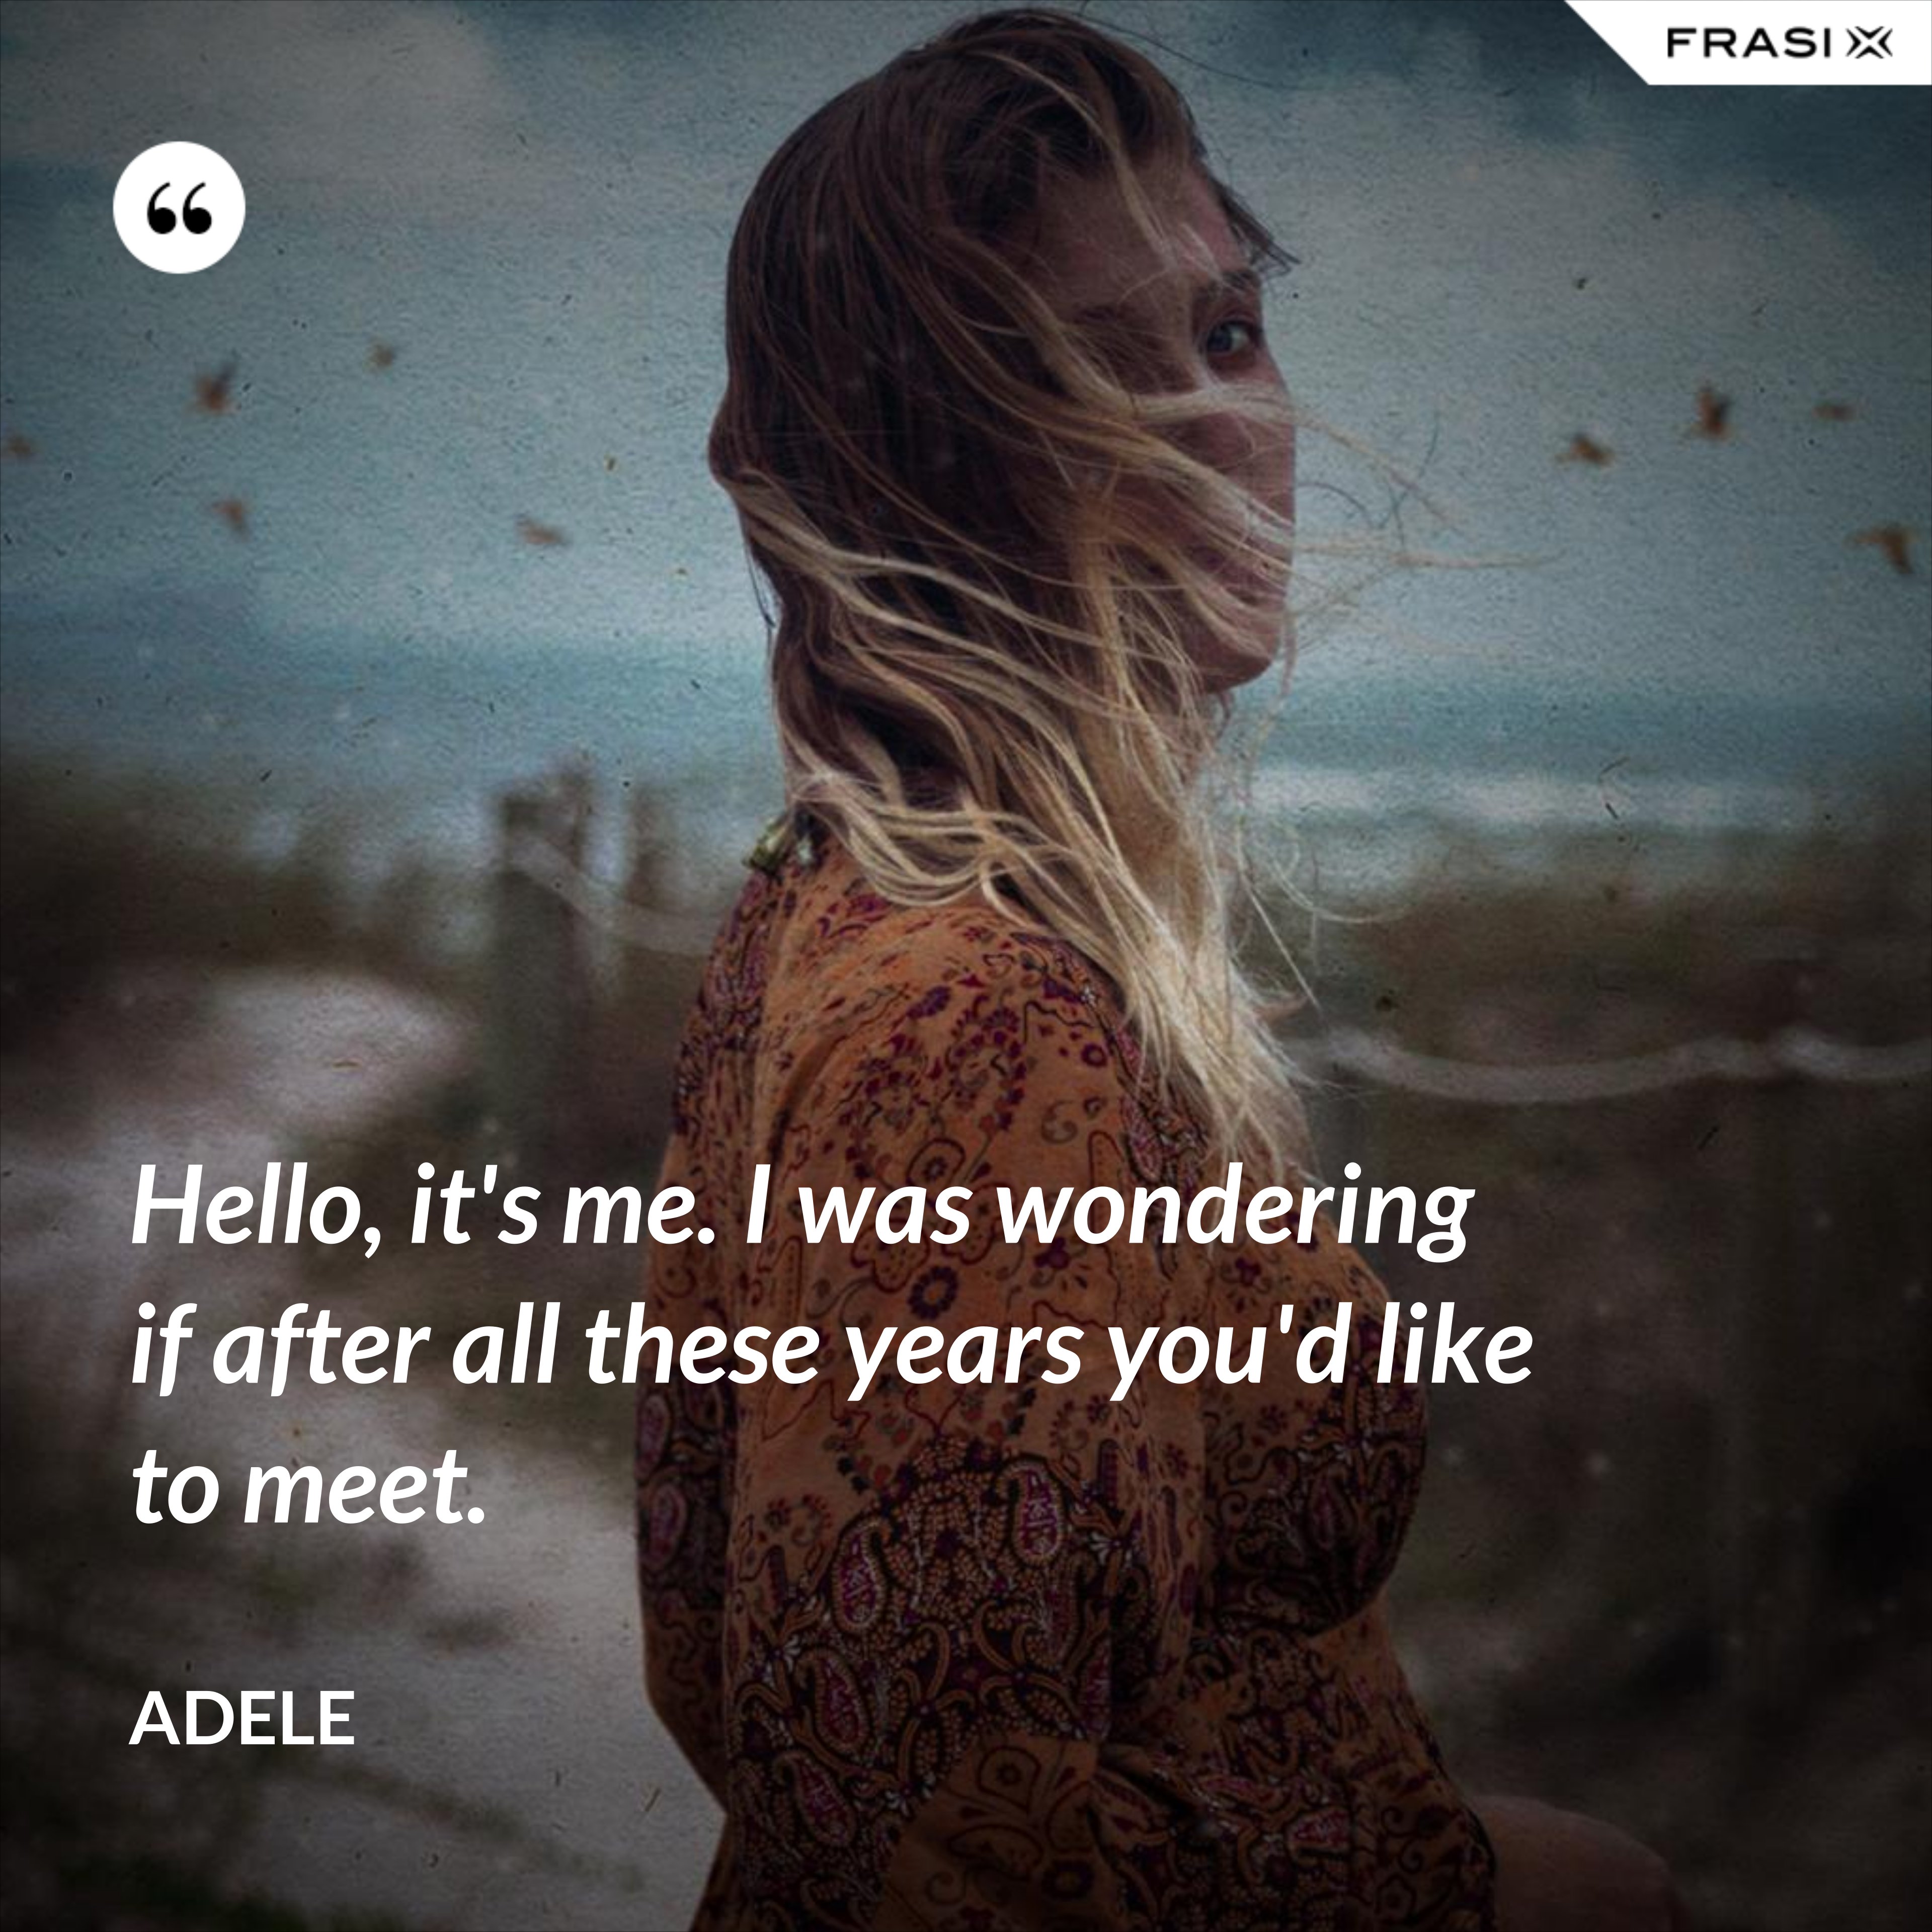 Hello, it's me. I was wondering if after all these years you'd like to meet. - Adele